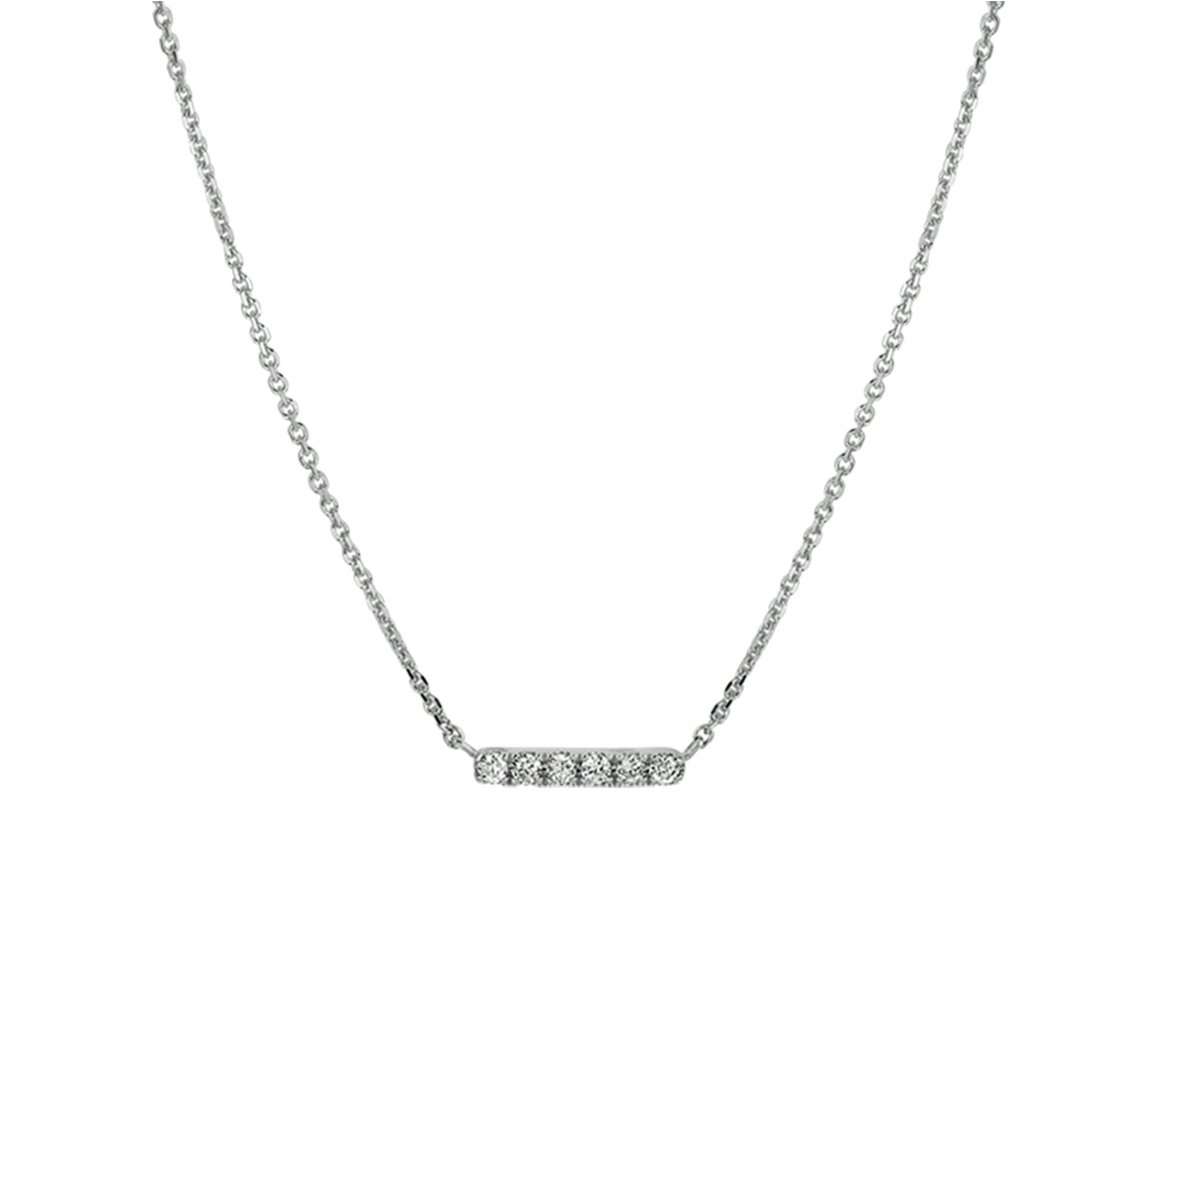 The Fashion Jewelry Collection Ketting Balkje Diamant 0.07ct H P1 41 - 43 - 45 cm - Witgoud